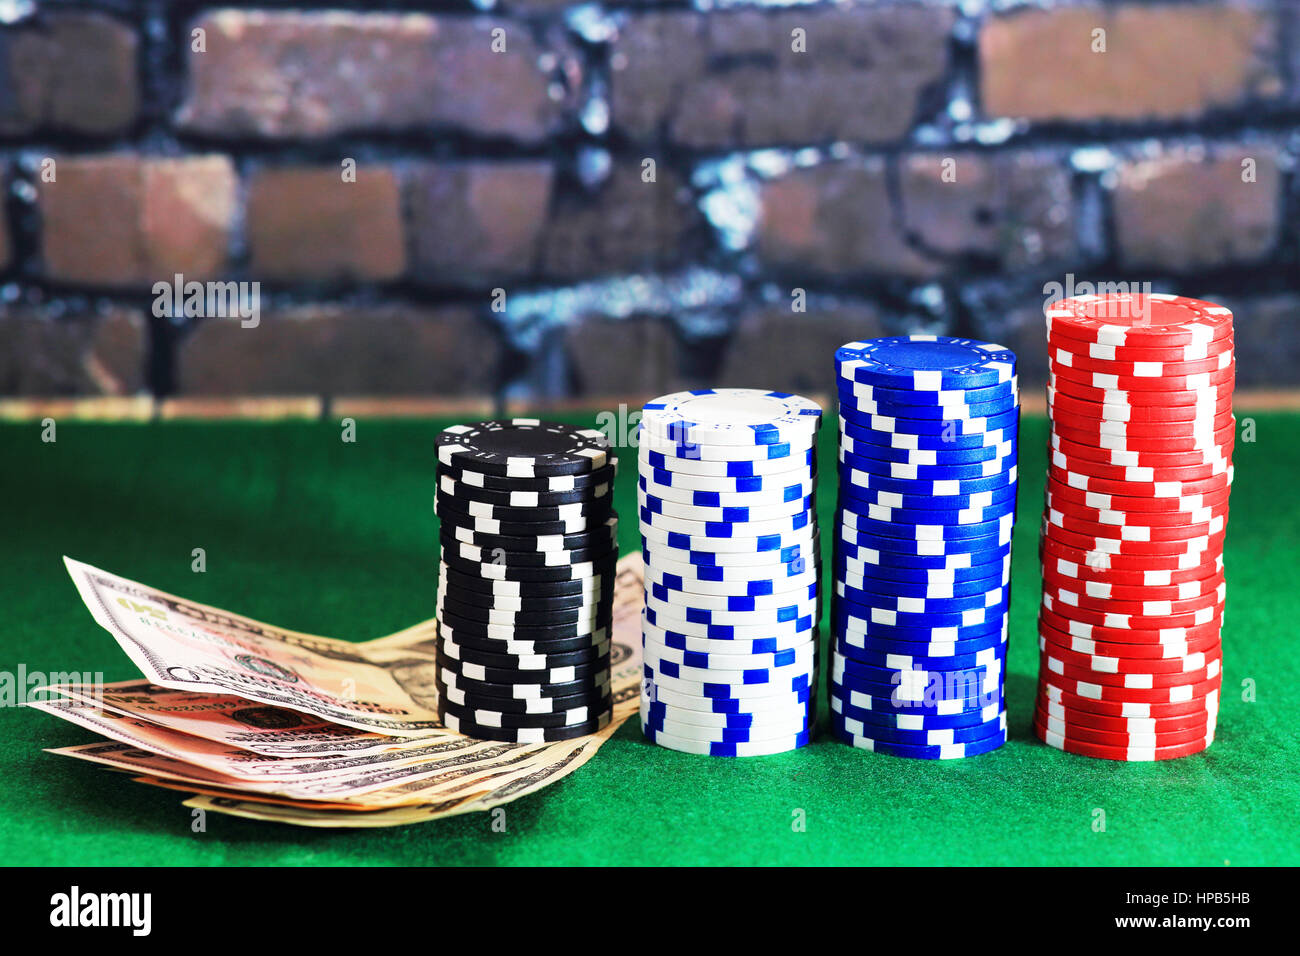 Casino chips and money on green poker table. Color poker chips in column form on brick wall background. Games of chance theme. Stock Photo